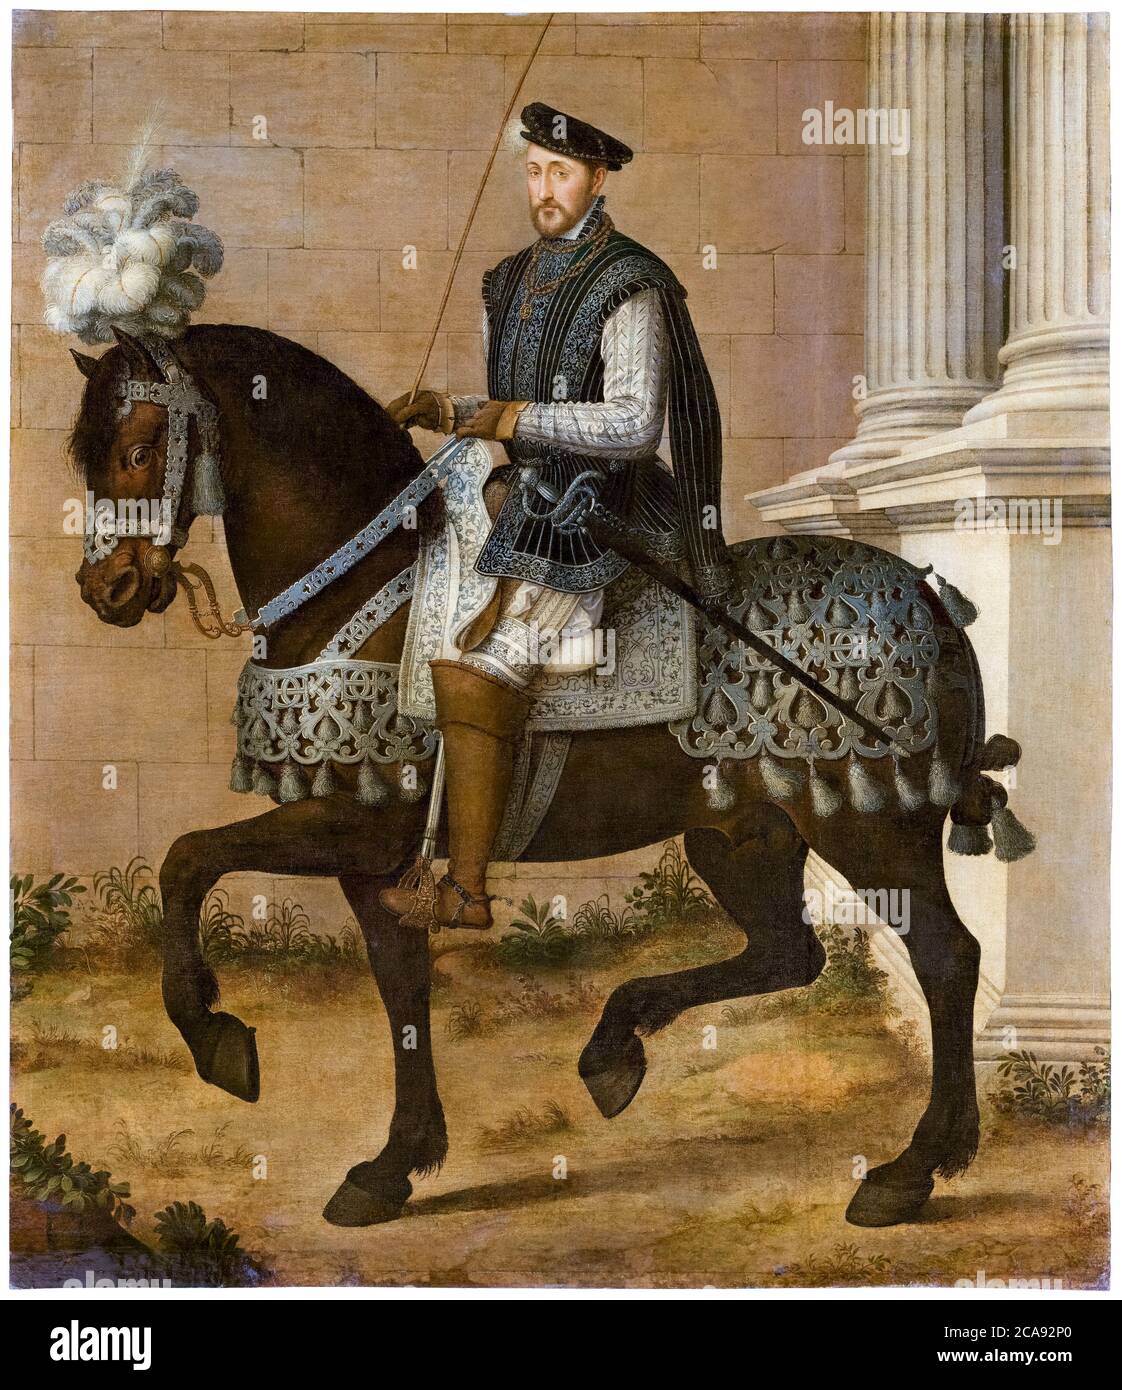 Henry II (1519-1559), King of France, equestrian portrait by Workshop of François Clouet, circa 1540 Stock Photo